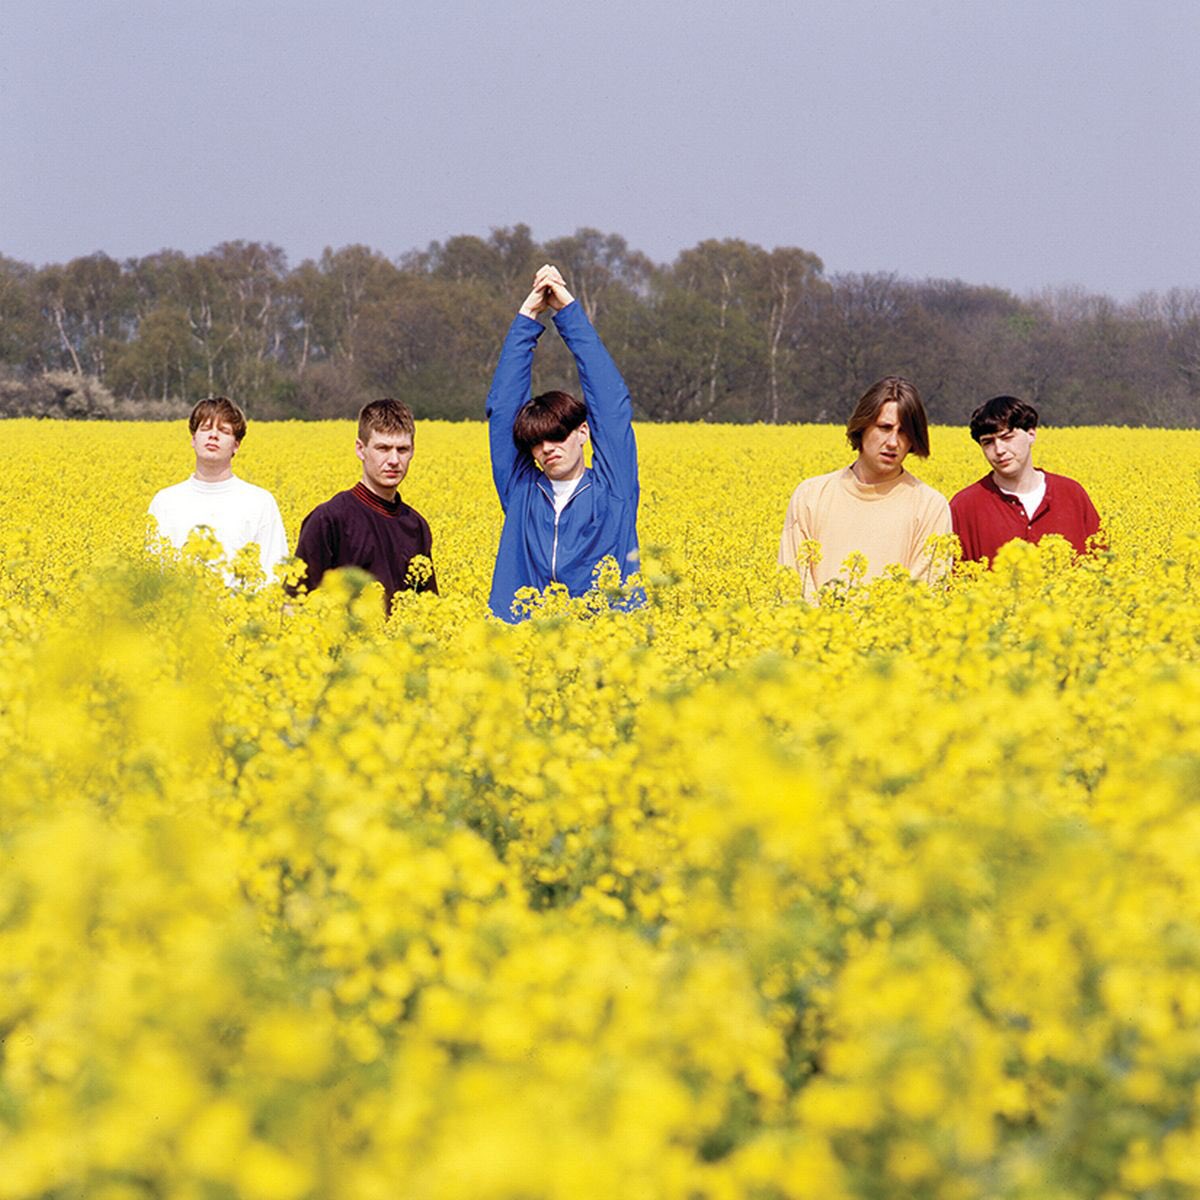 Okay, this is mad:  @martin_j_wilson has pointed out that in addition to the original photo, there are also The-Charlatans-standing-about-in-oilseed-rape photo sessions from 1995 and 2009! What's the obsession with trampling crops,  @Tim_Burgess?